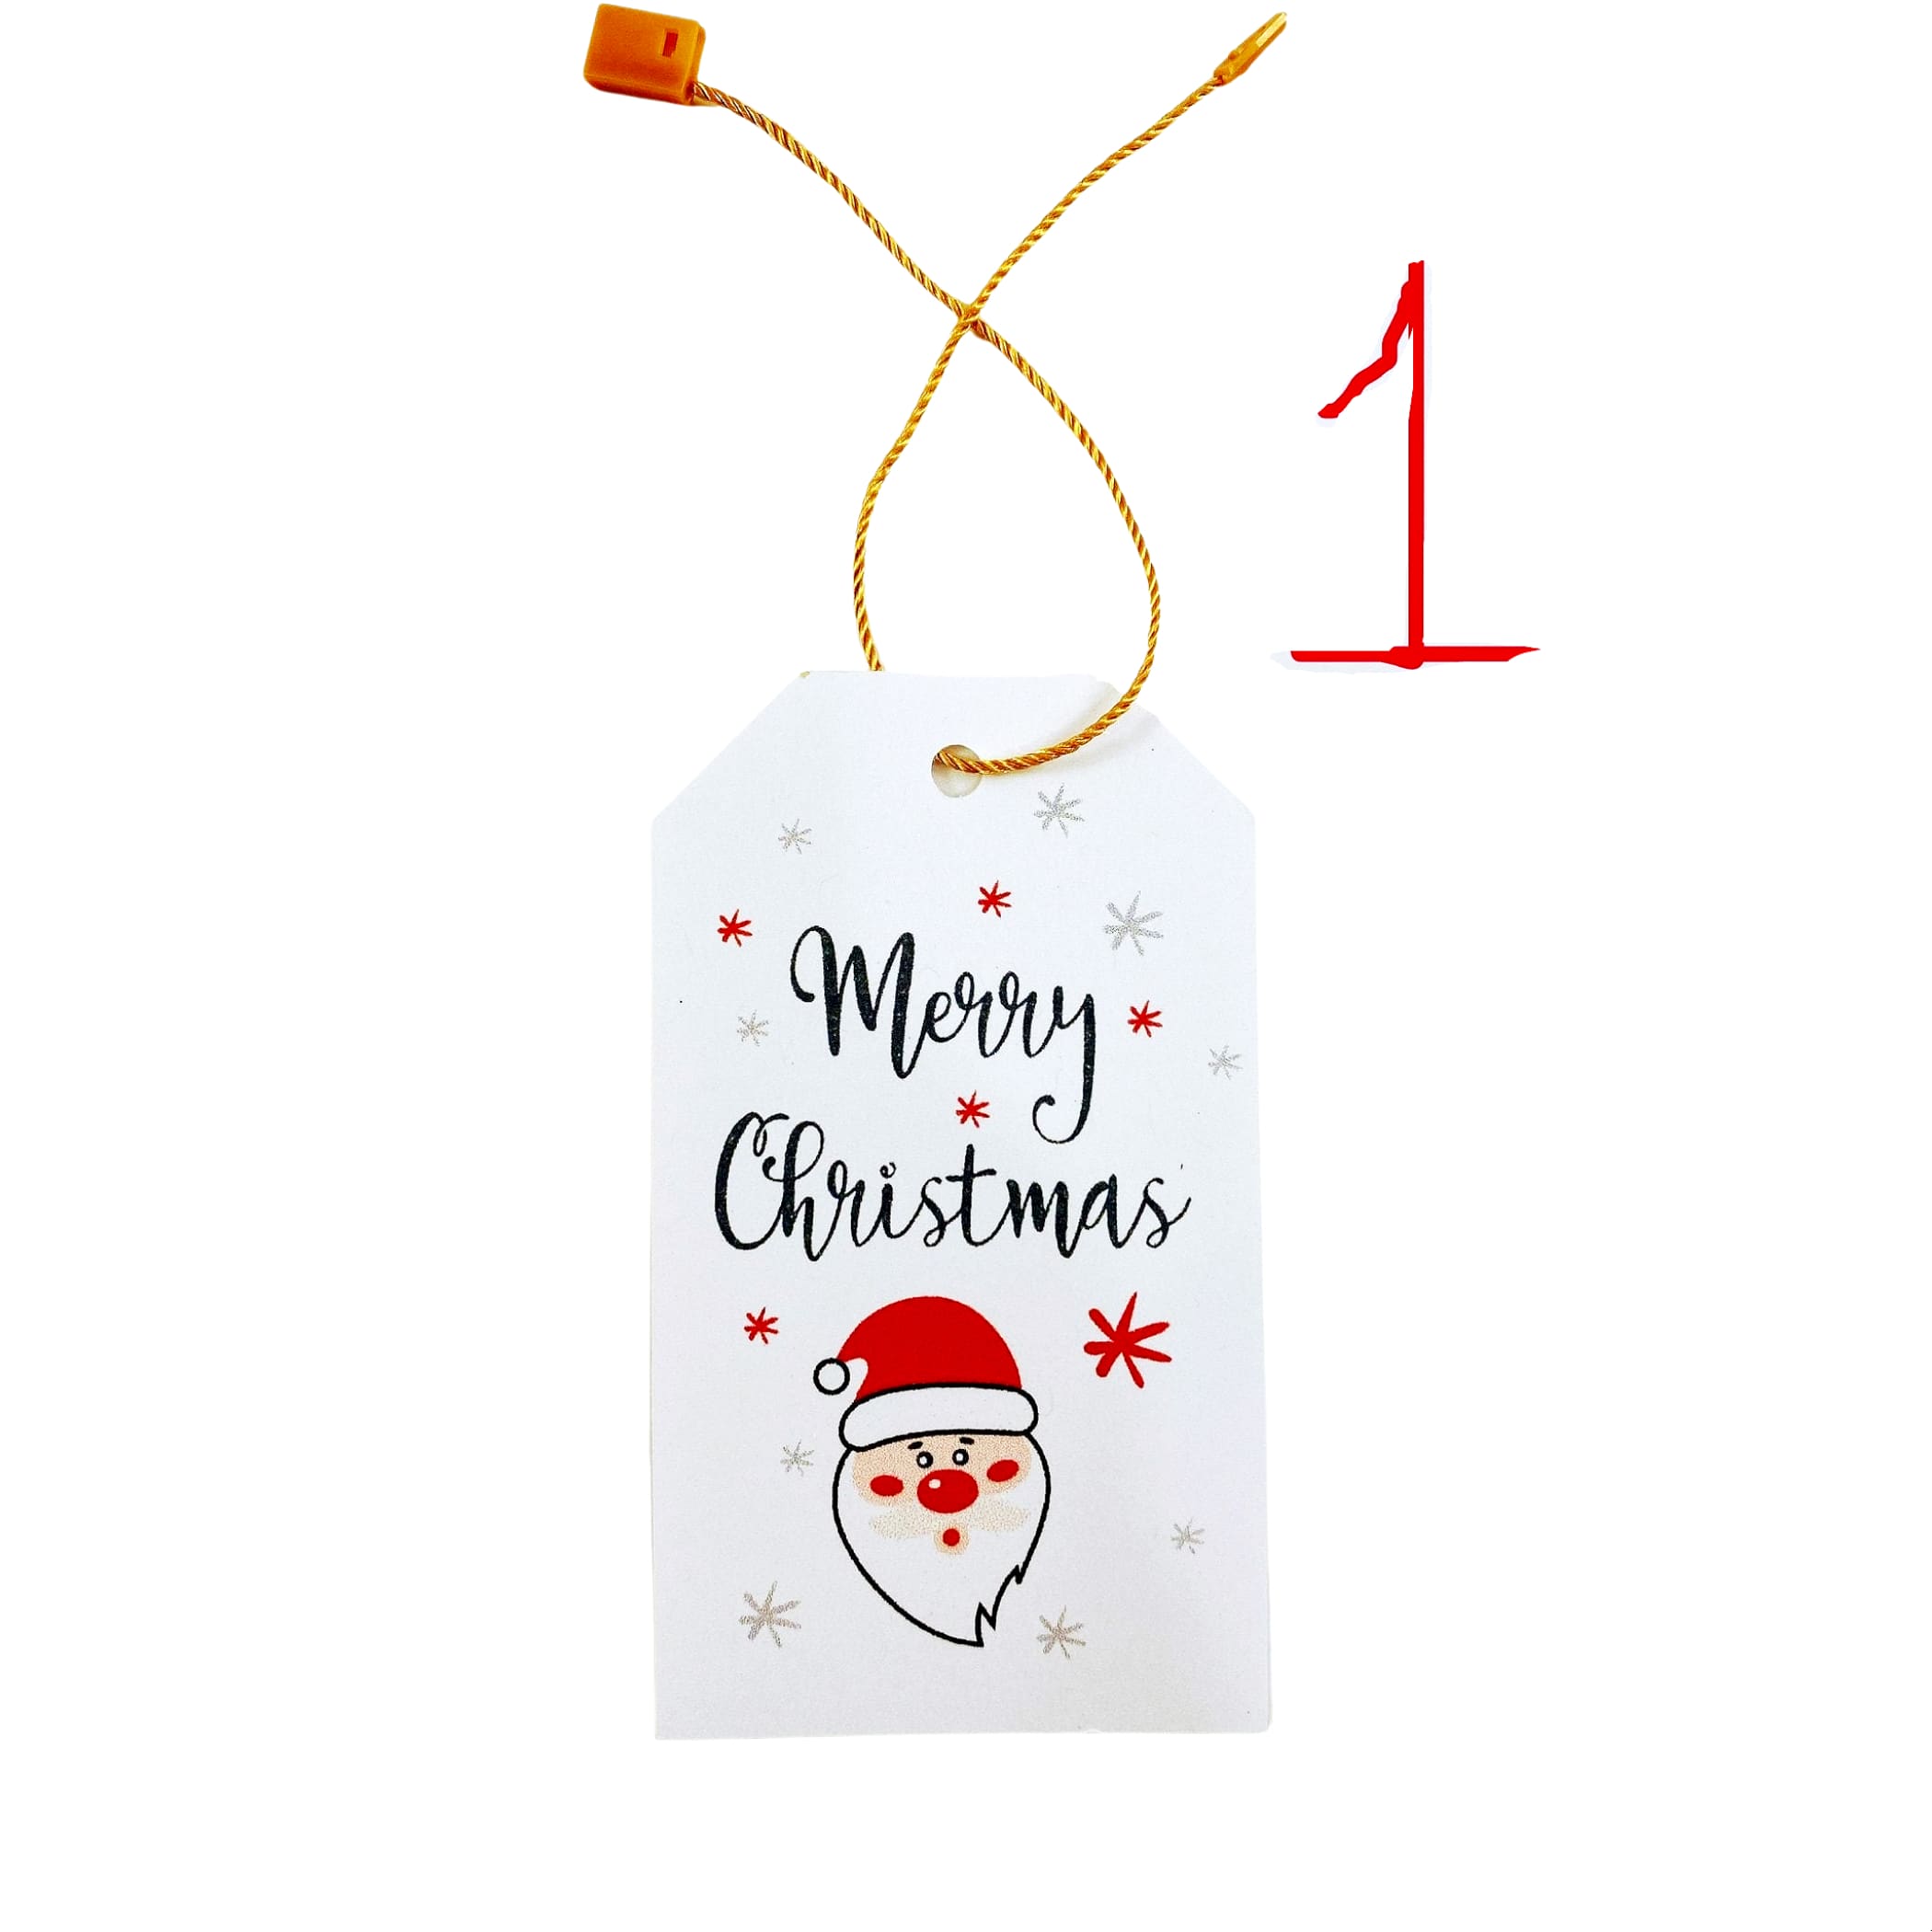 Merry christmas holiday favor 10 printed tags for gifts